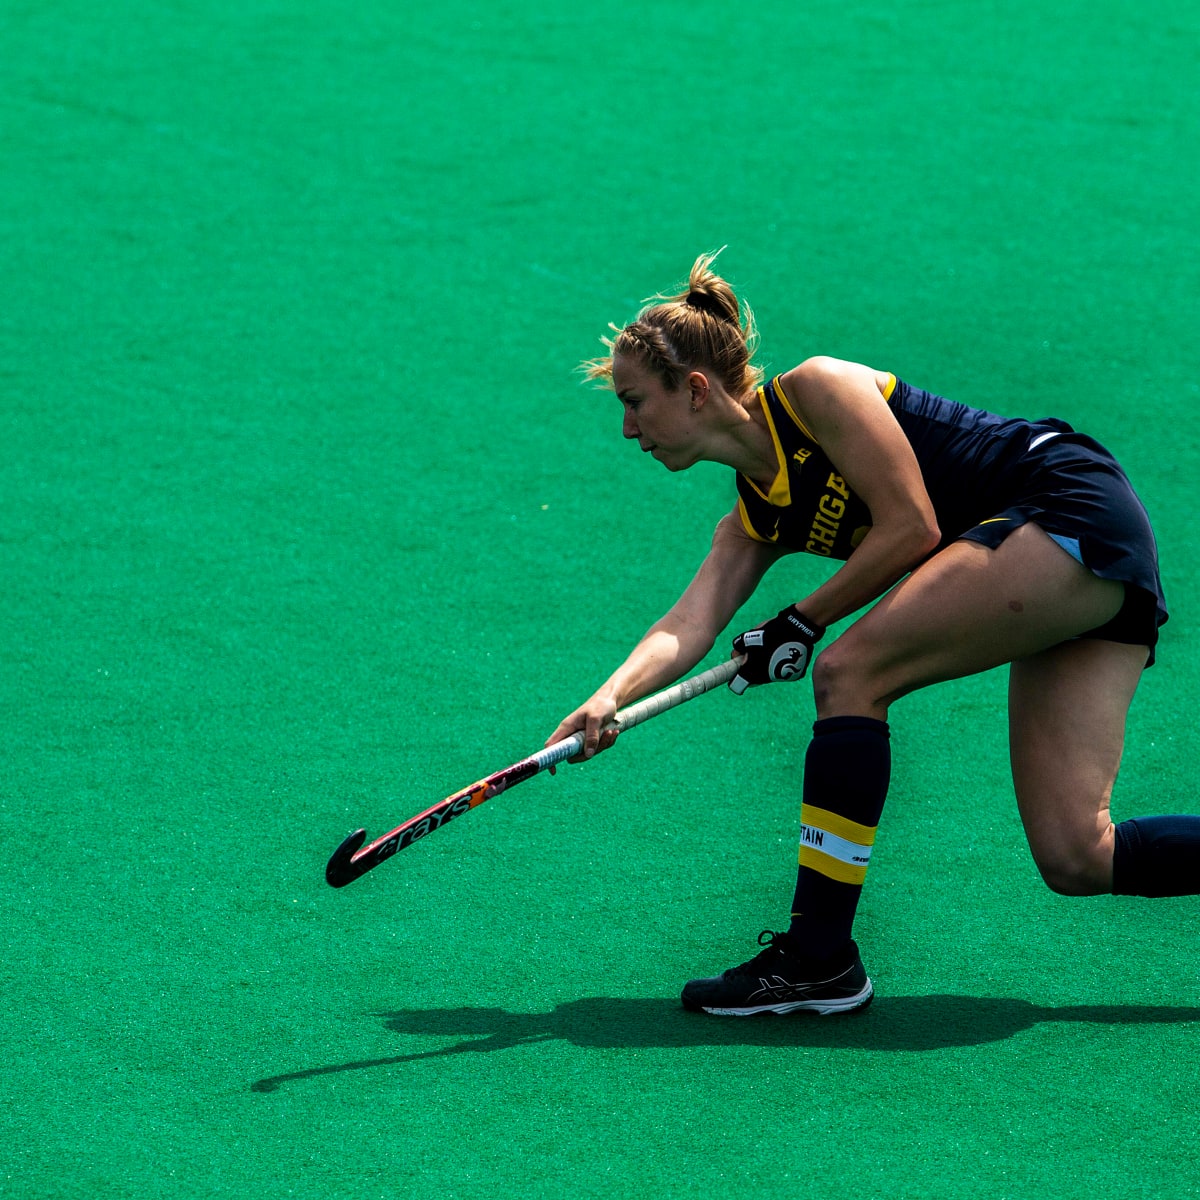 Cal at Stanford Free Live Stream College Field Hockey - How to Watch and Stream Major League and College Sports